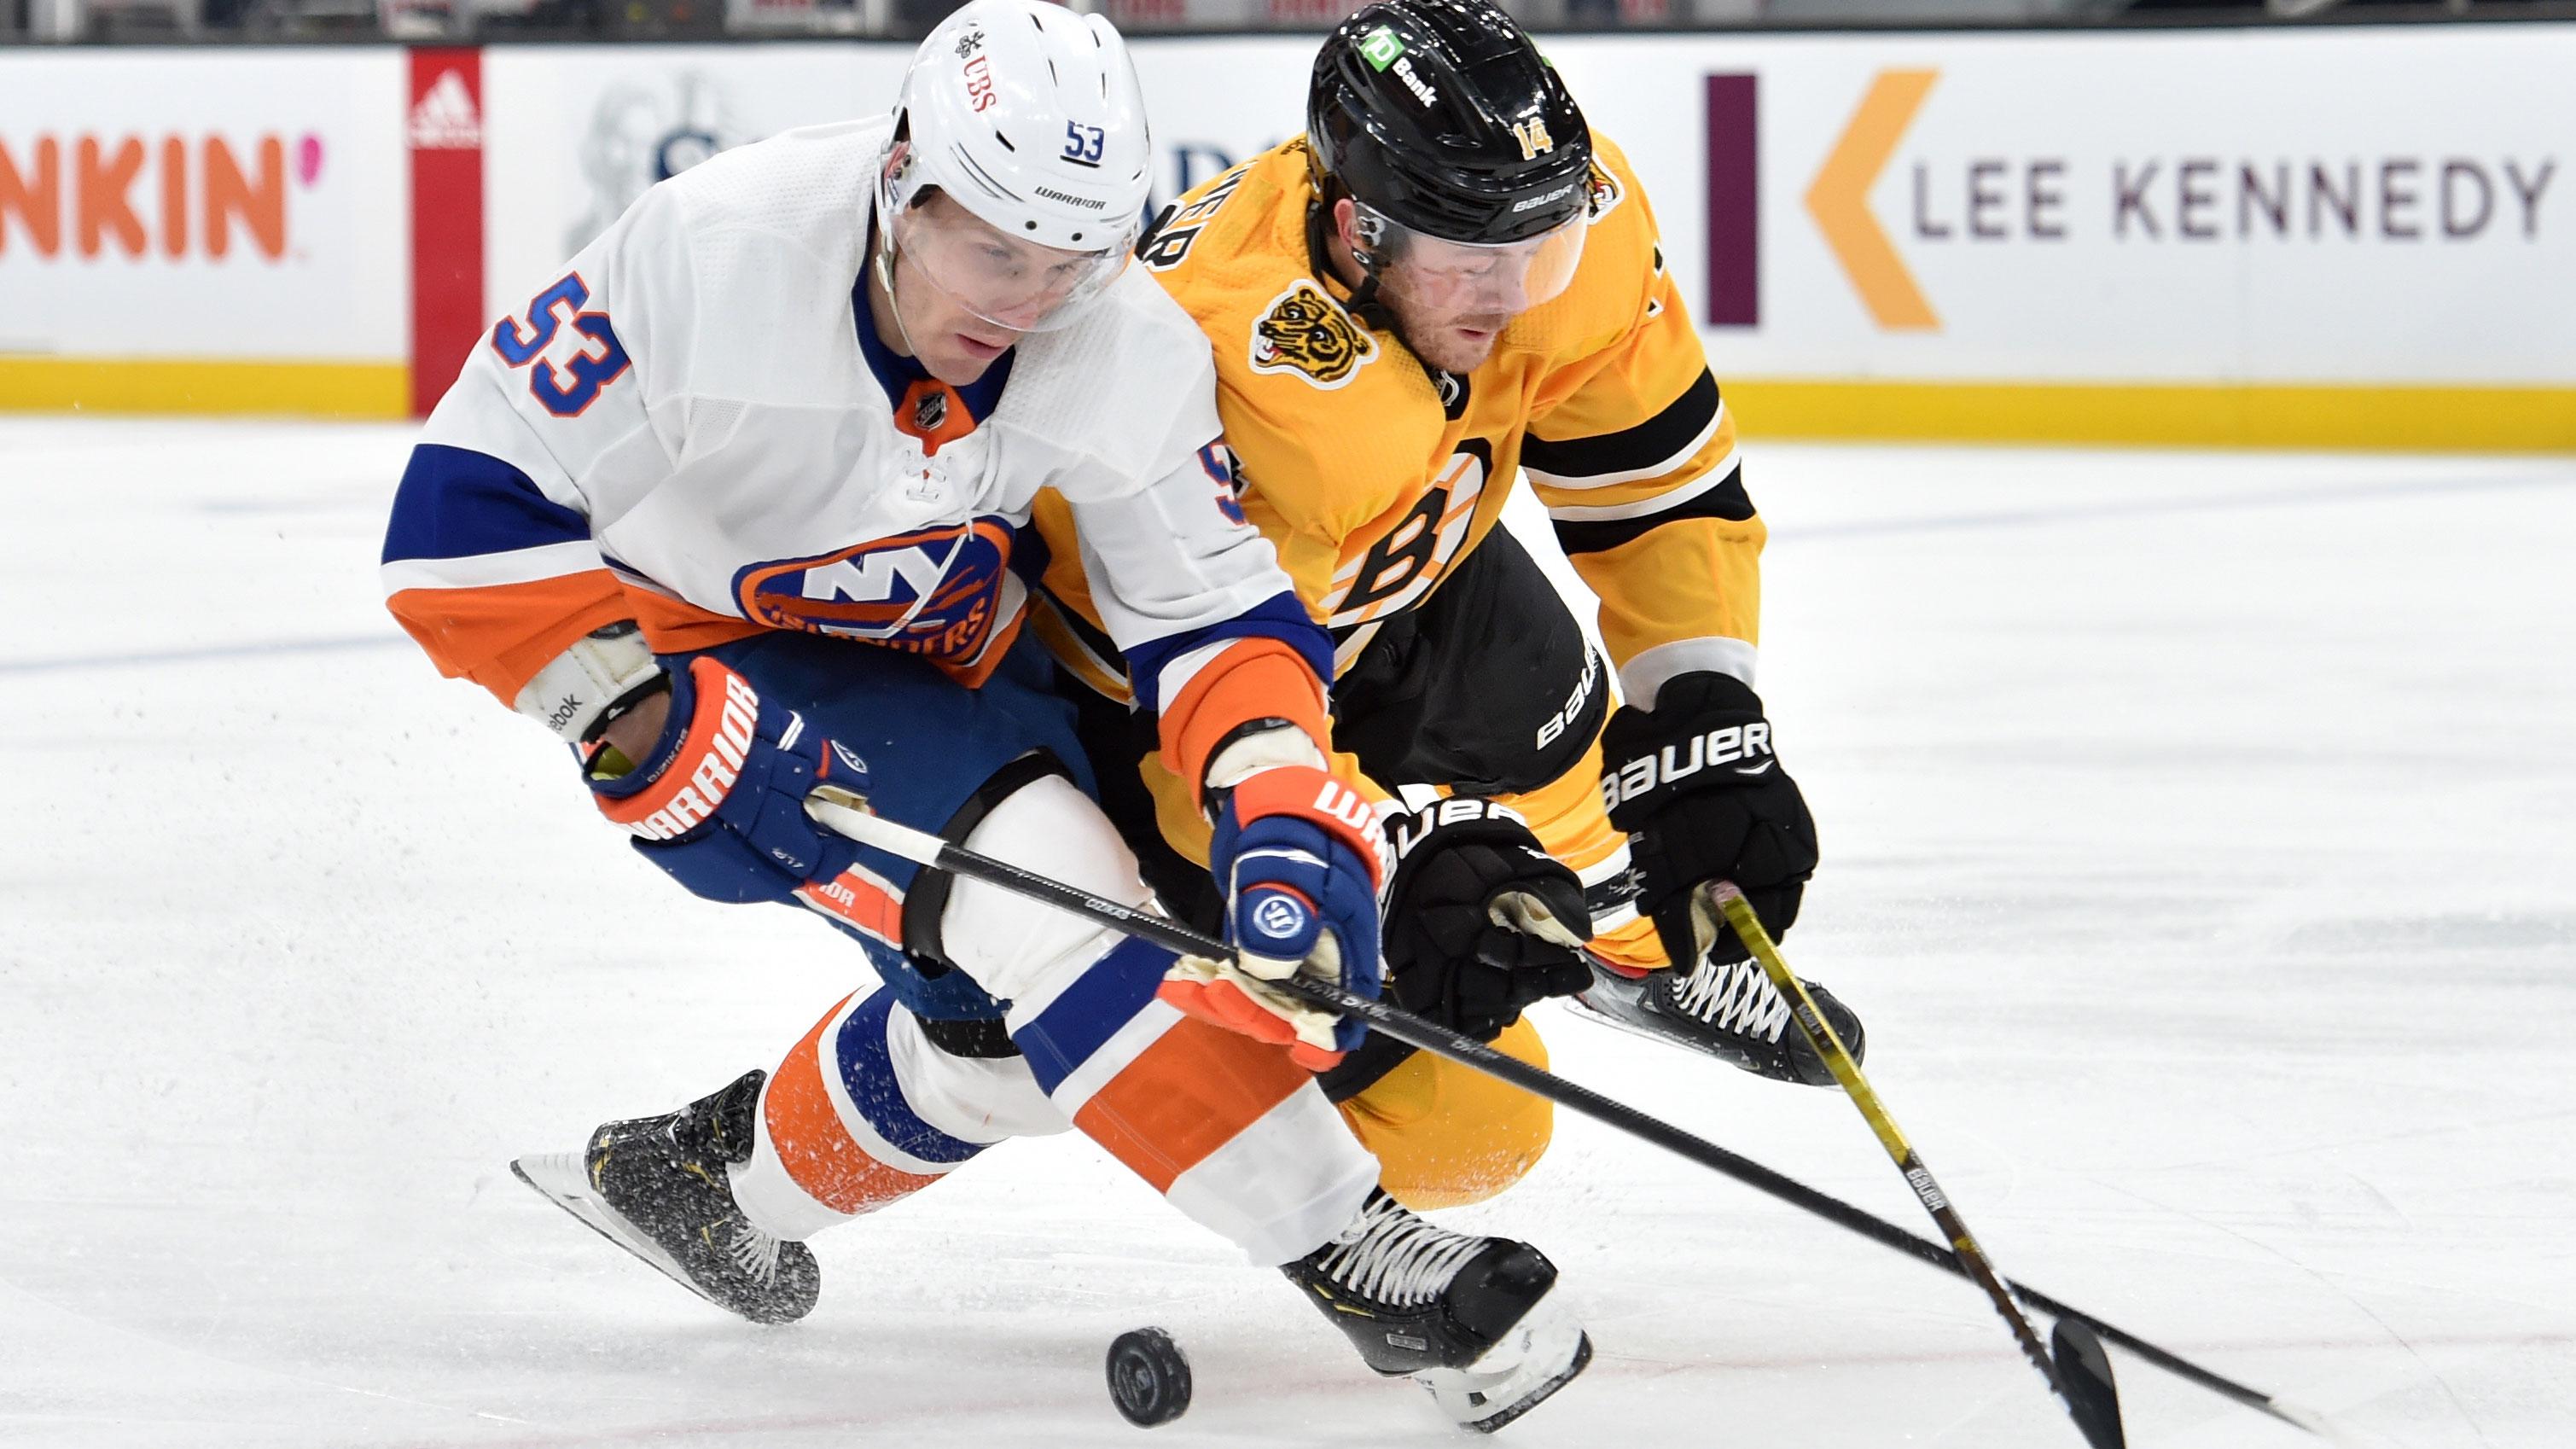 Apr 15, 2021; Boston, Massachusetts, USA; New York Islanders center Casey Cizikas (53) and Boston Bruins right wing Chris Wagner (14) battle for the puck during the first period at TD Garden. / Bob DeChiara-USA TODAY Sports